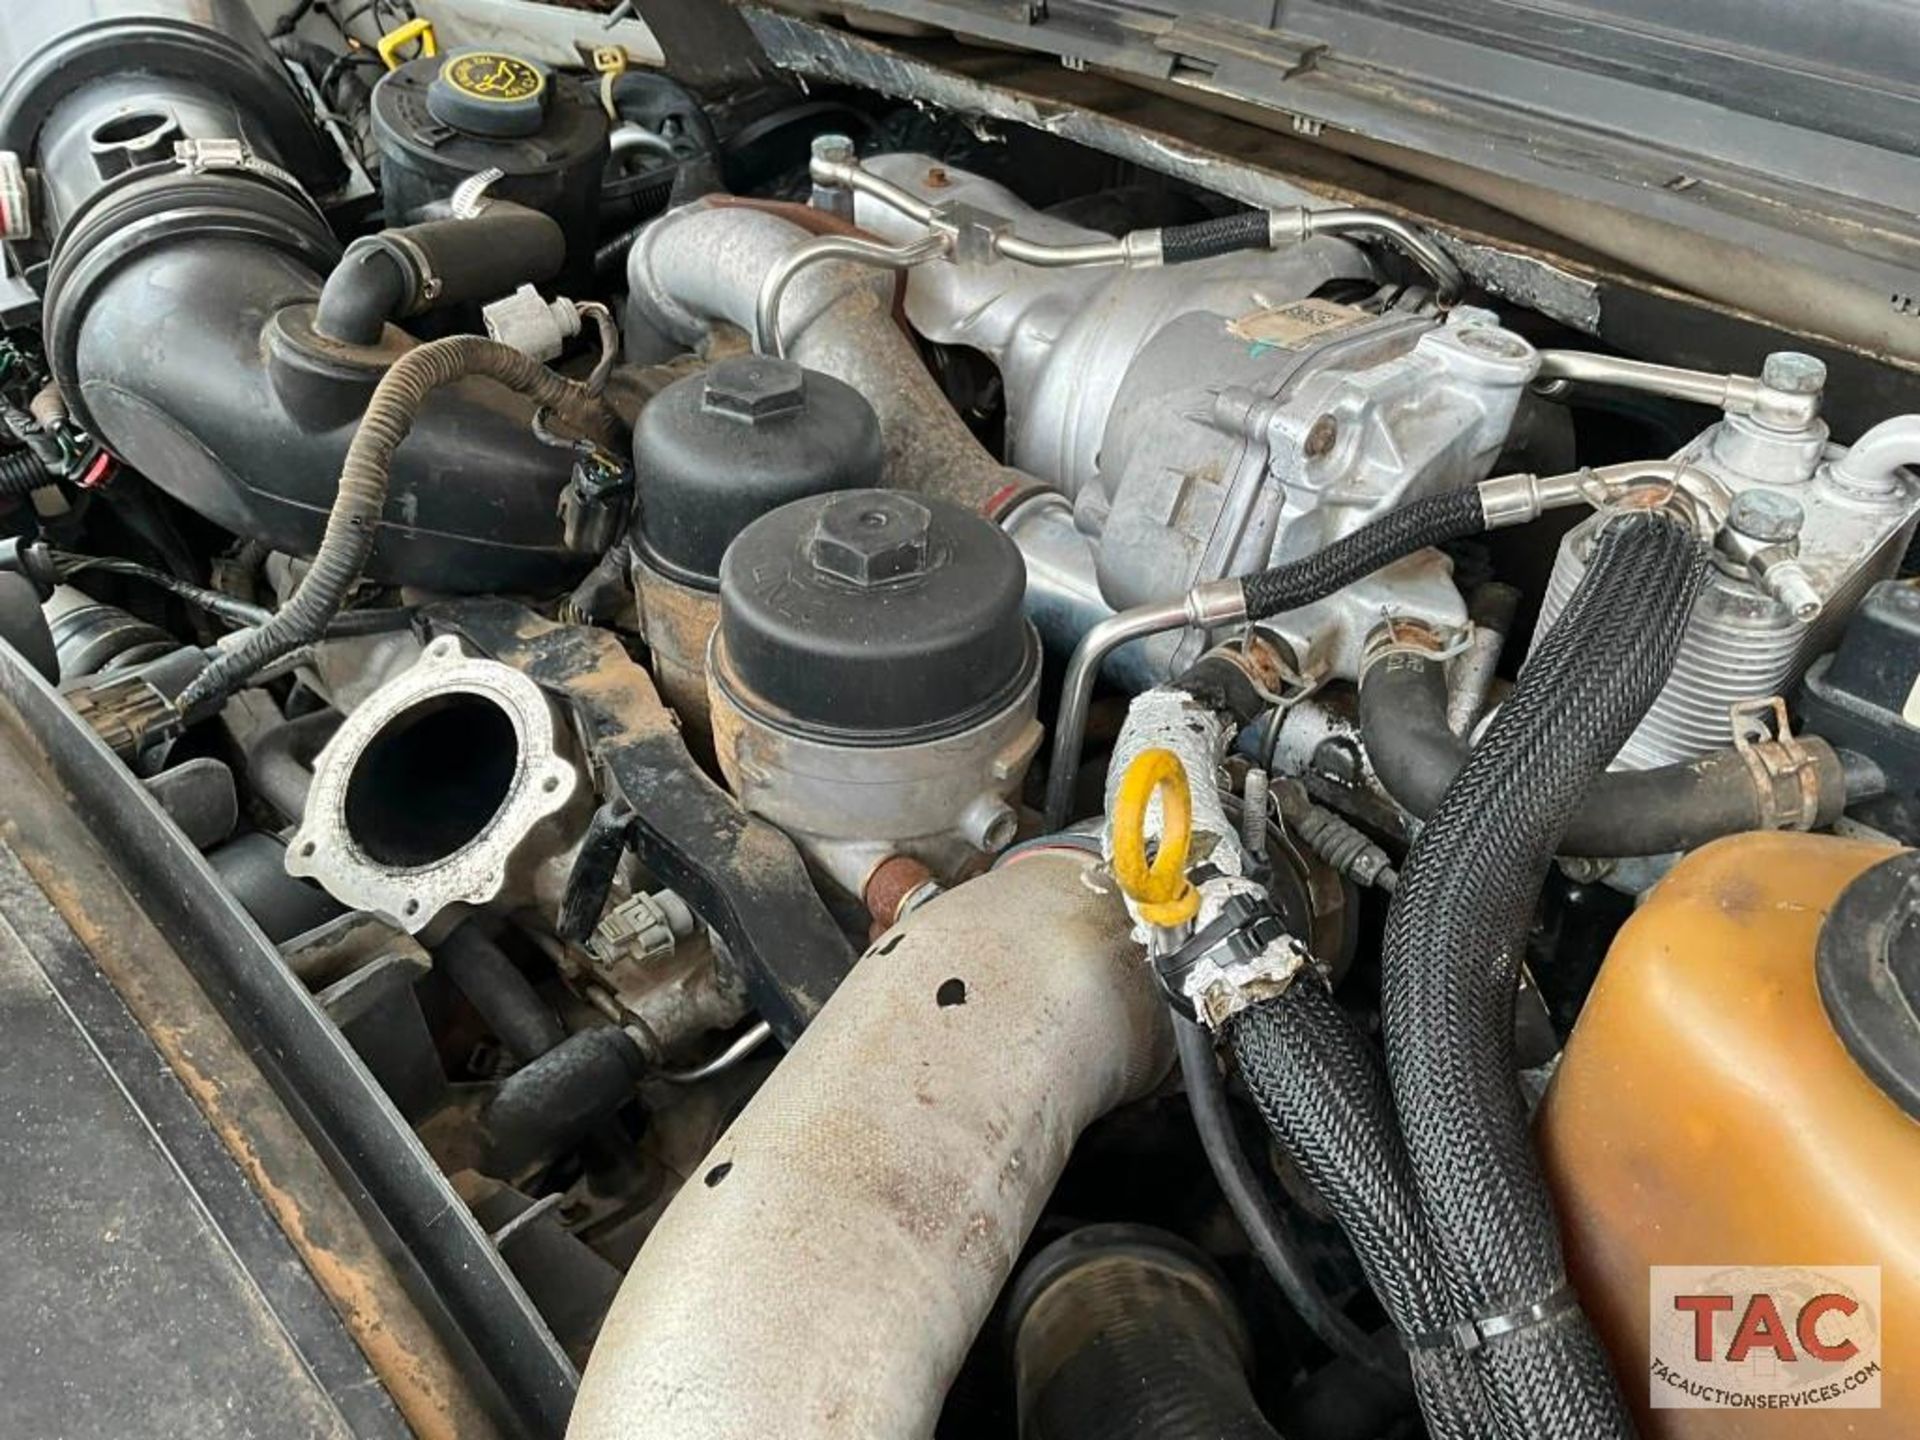 2008 Ford F-350 Super Duty Service Truck - Image 93 of 124